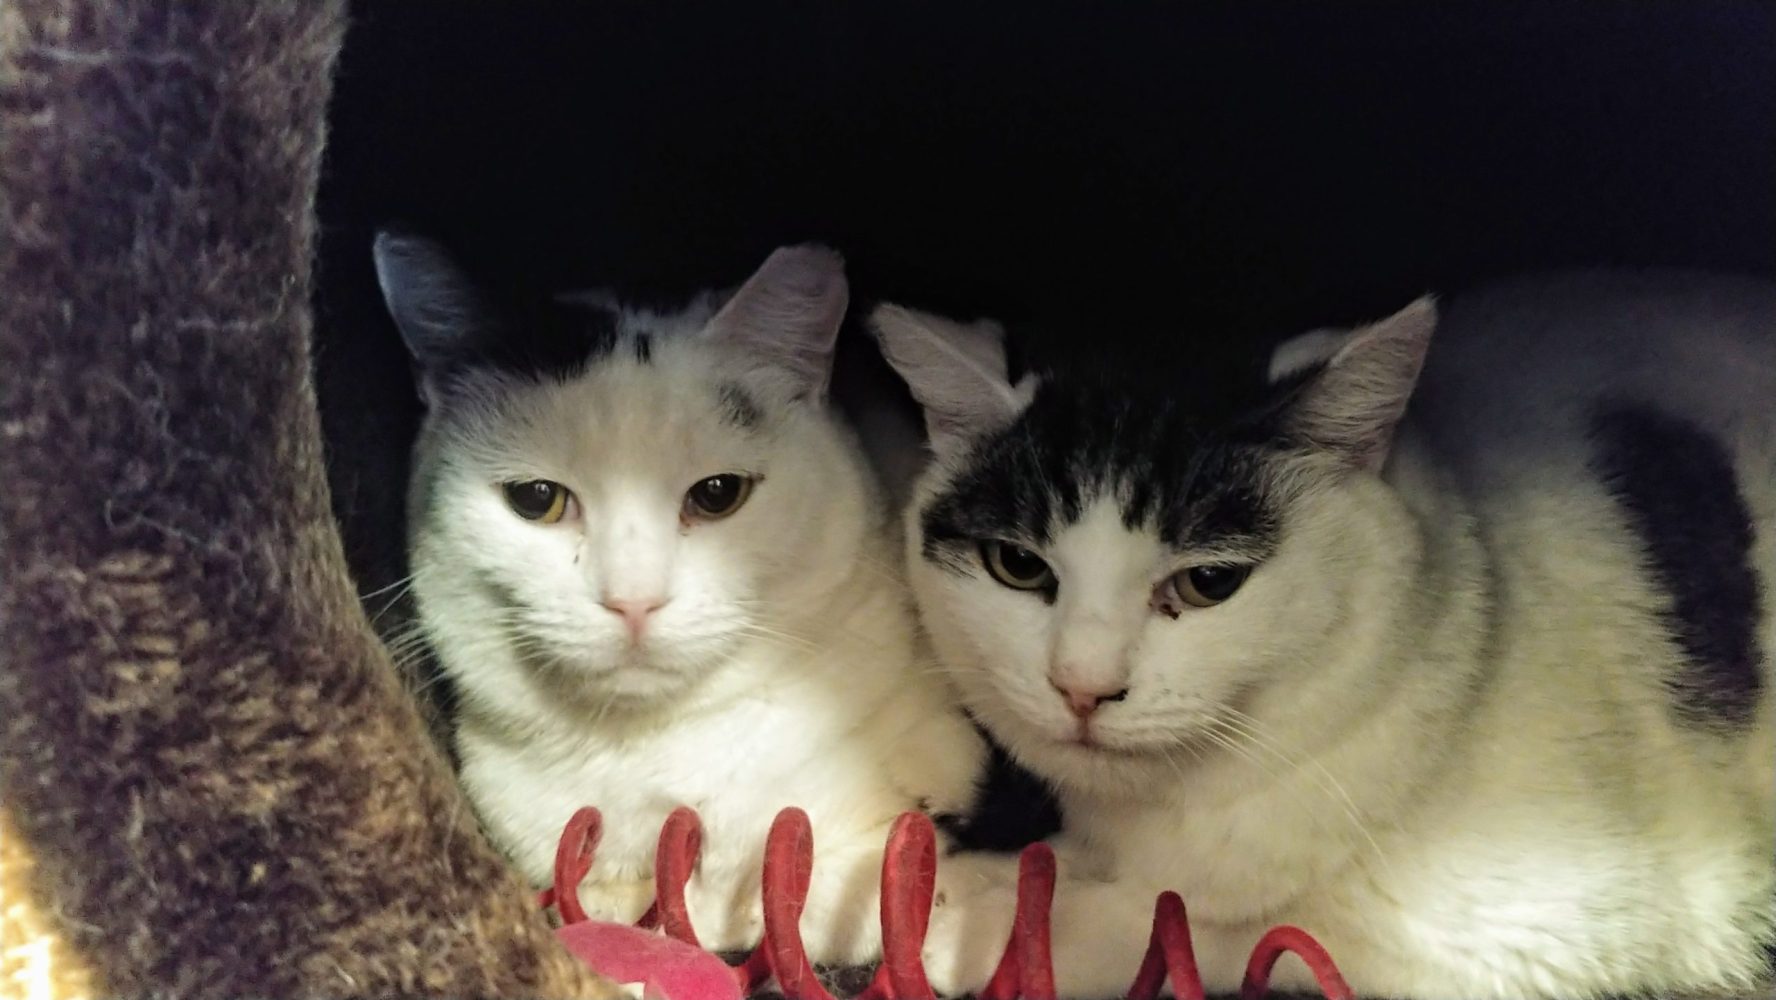 Meet Inky and Celeste at The Cat Cafe